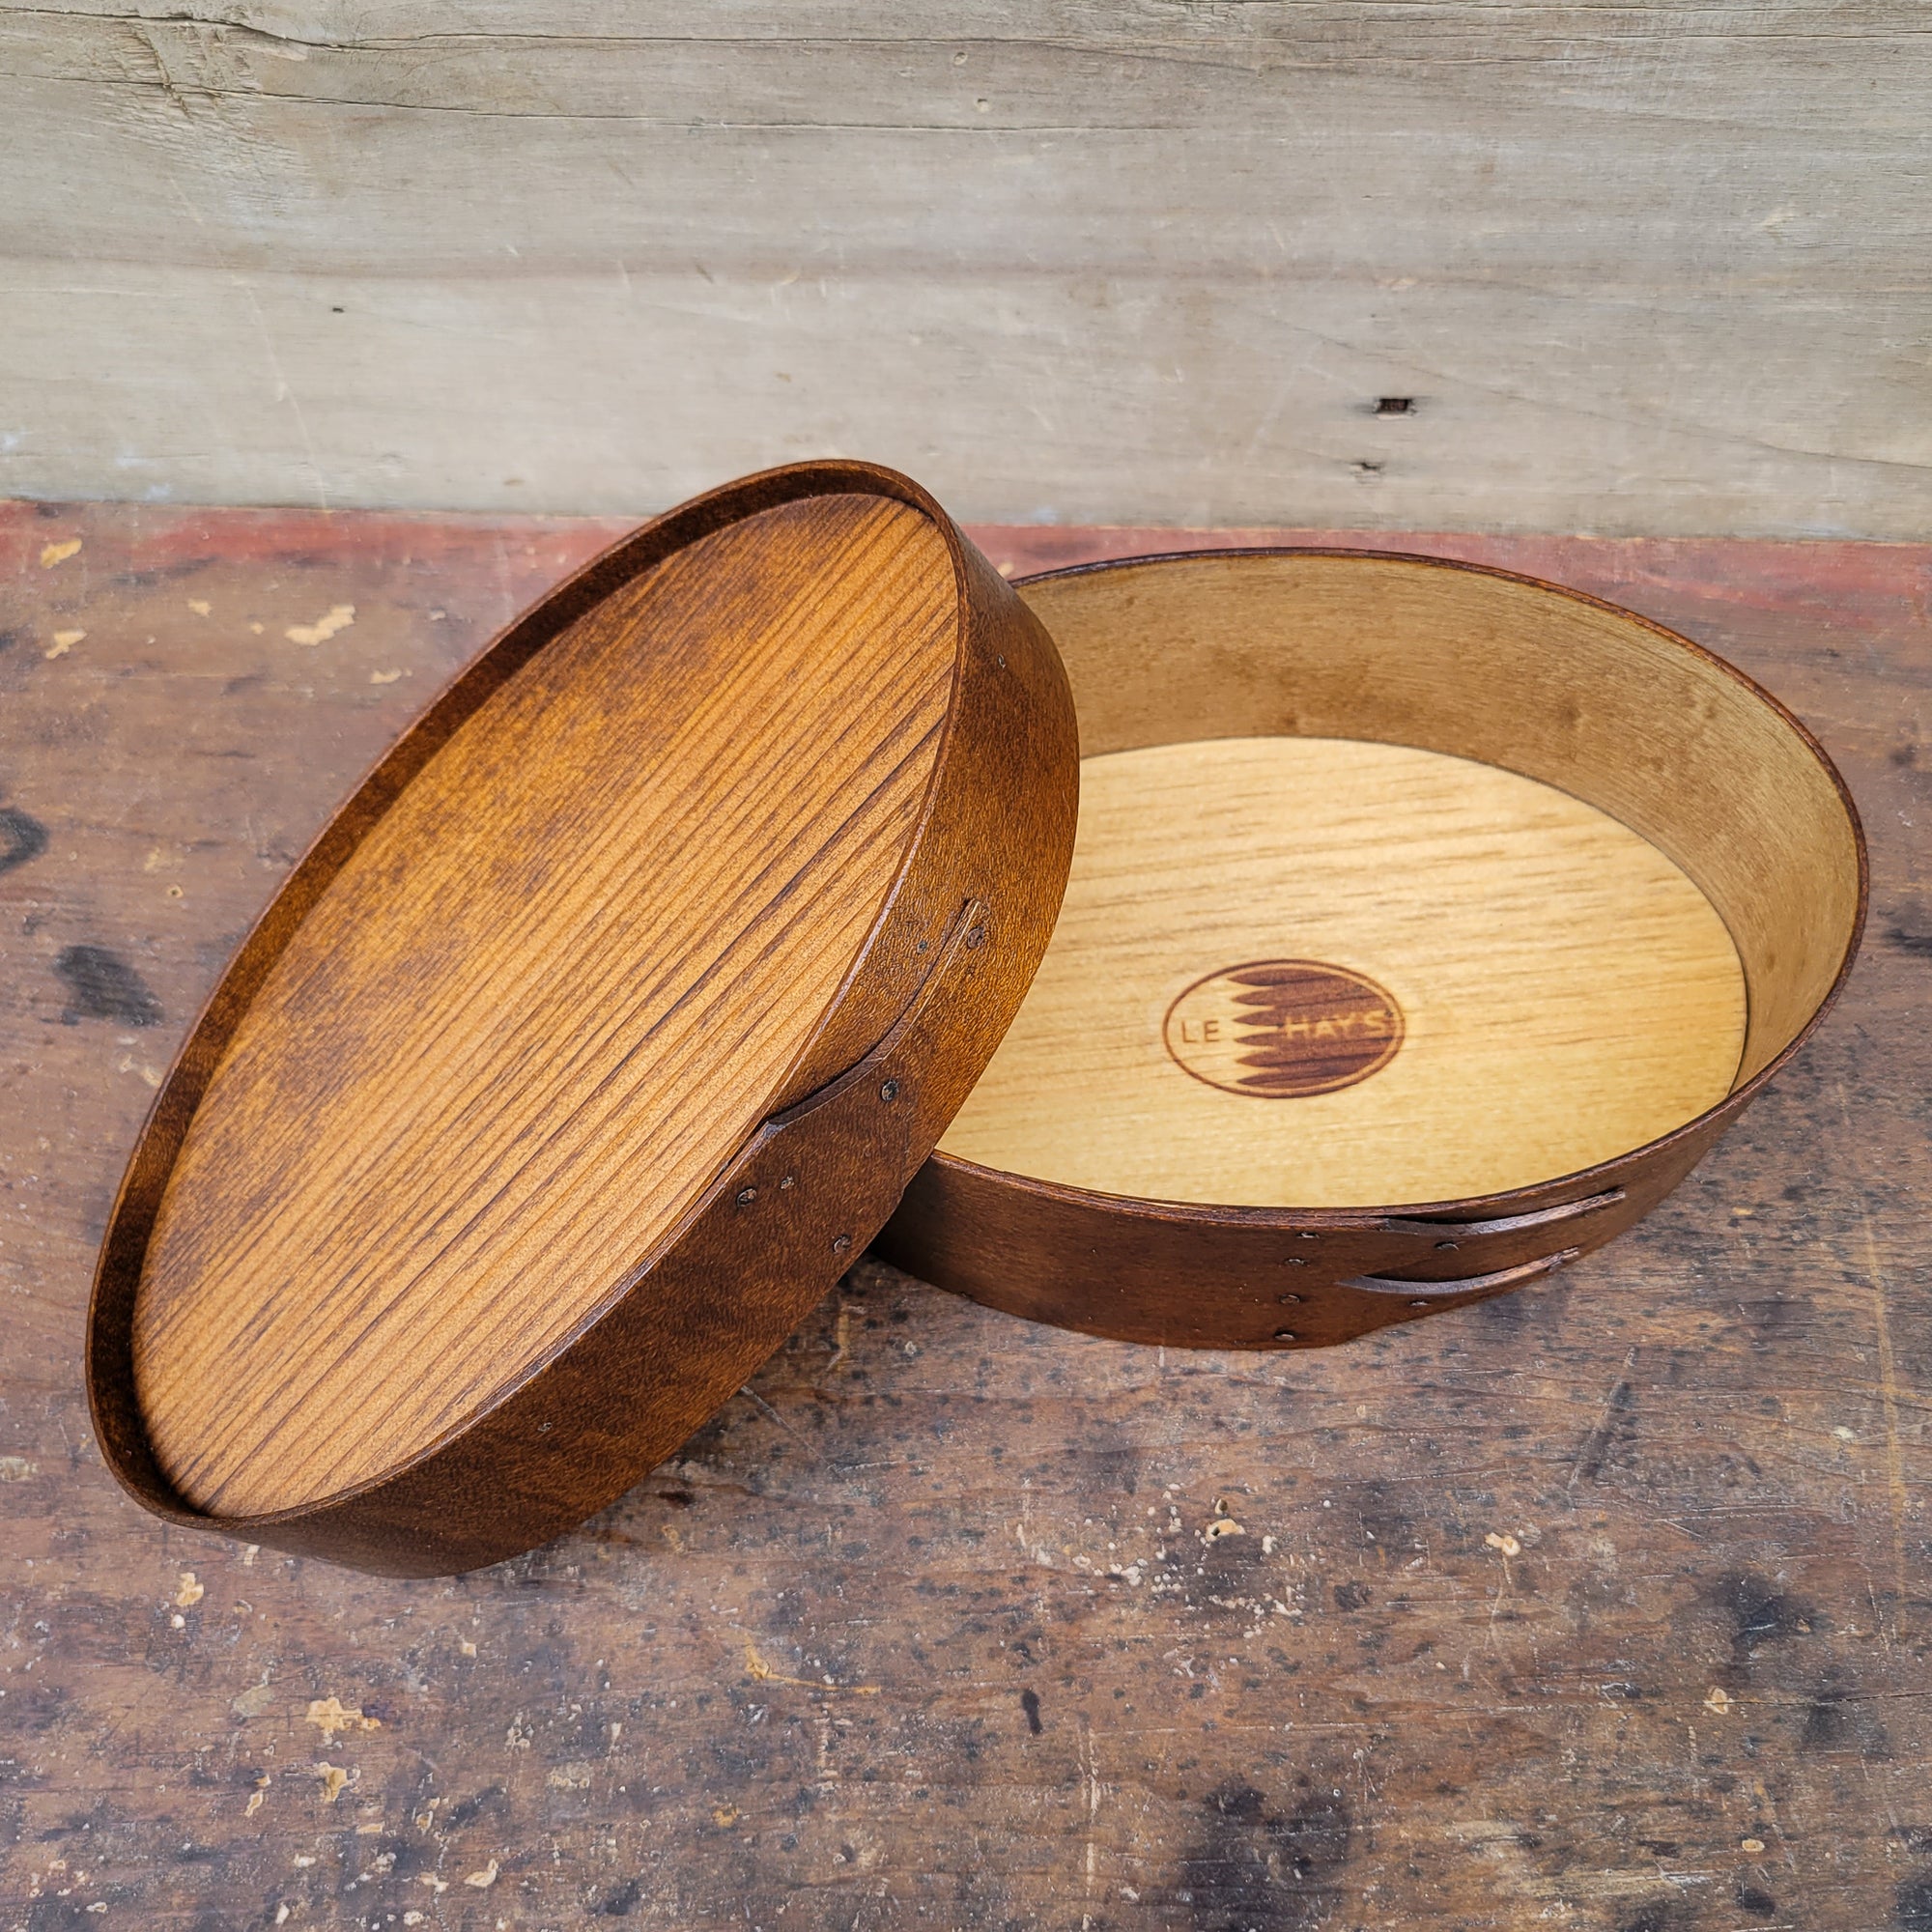 Shaker Oval Box with Recessed Lid for Needlework, Size #3, LeHays Shaker Boxes, Interior View